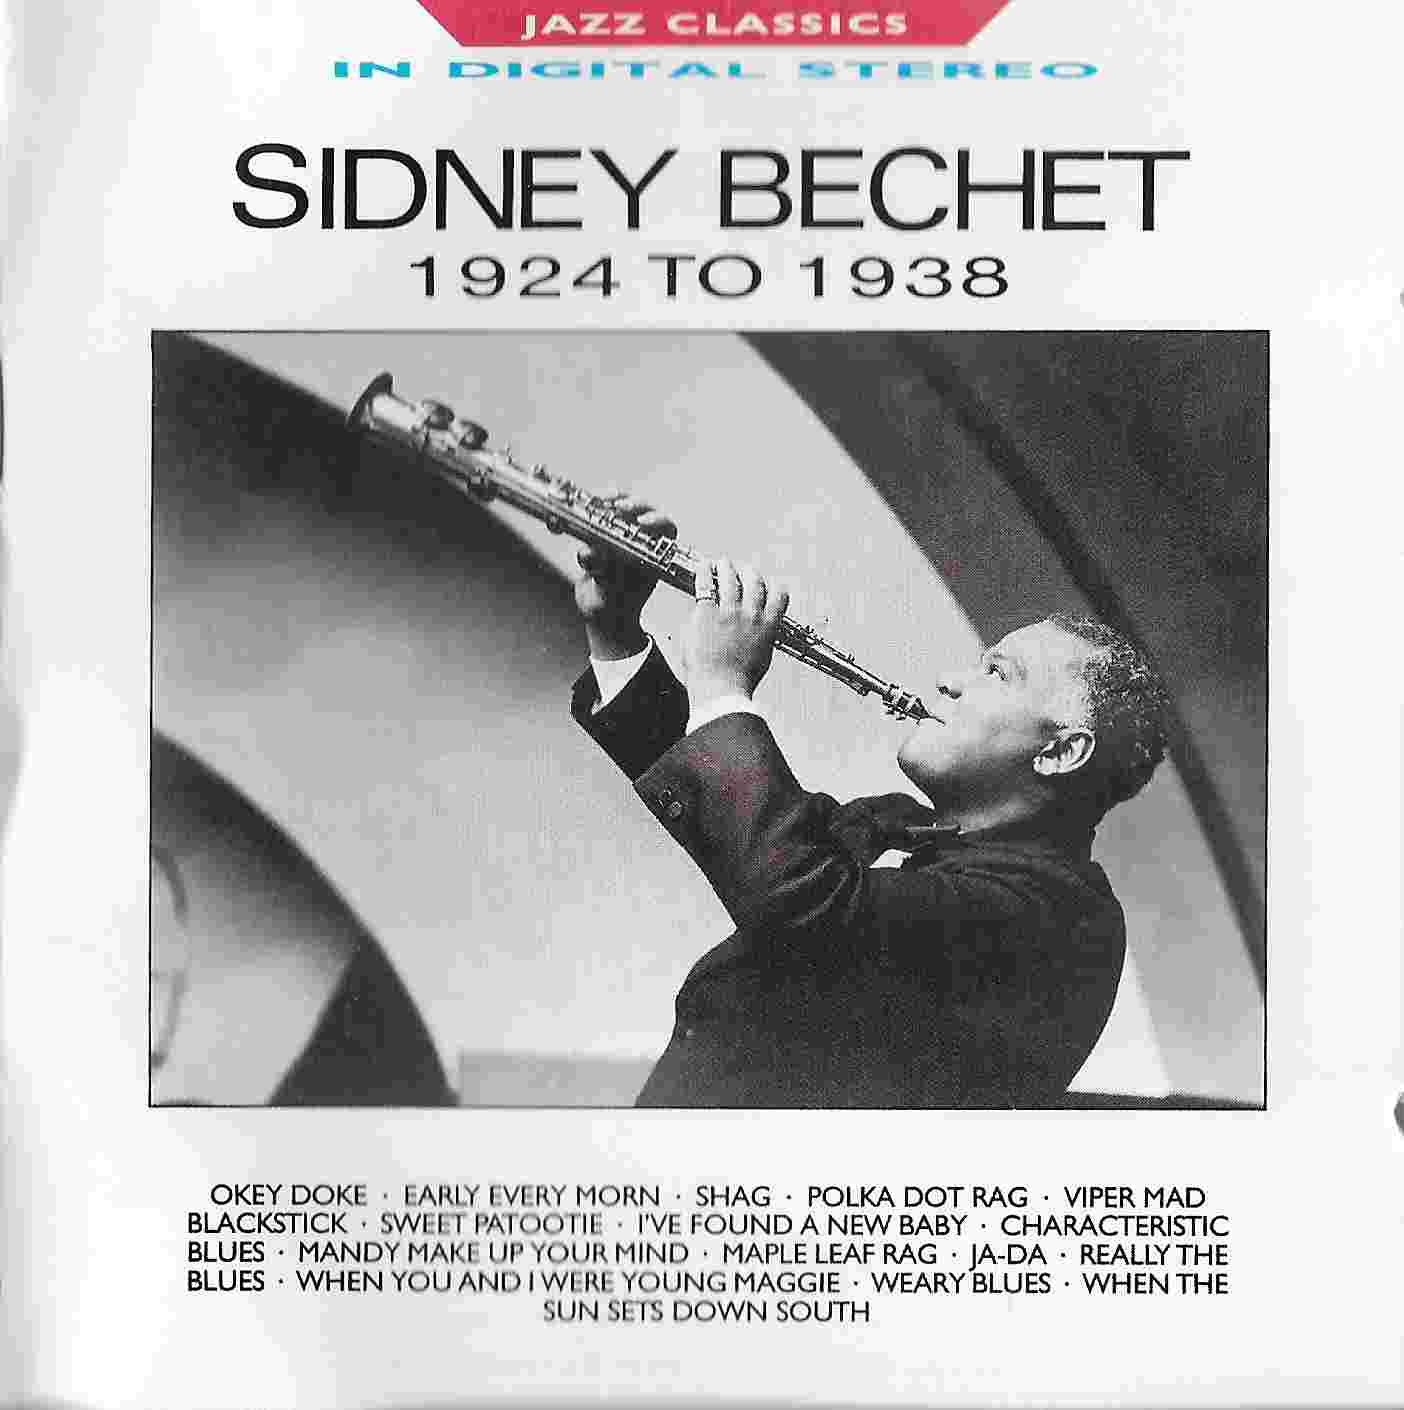 Picture of Jazz classics - Sidney Bechet 1925 - 1928 by artist Sidney Bechet  from the BBC cds - Records and Tapes library